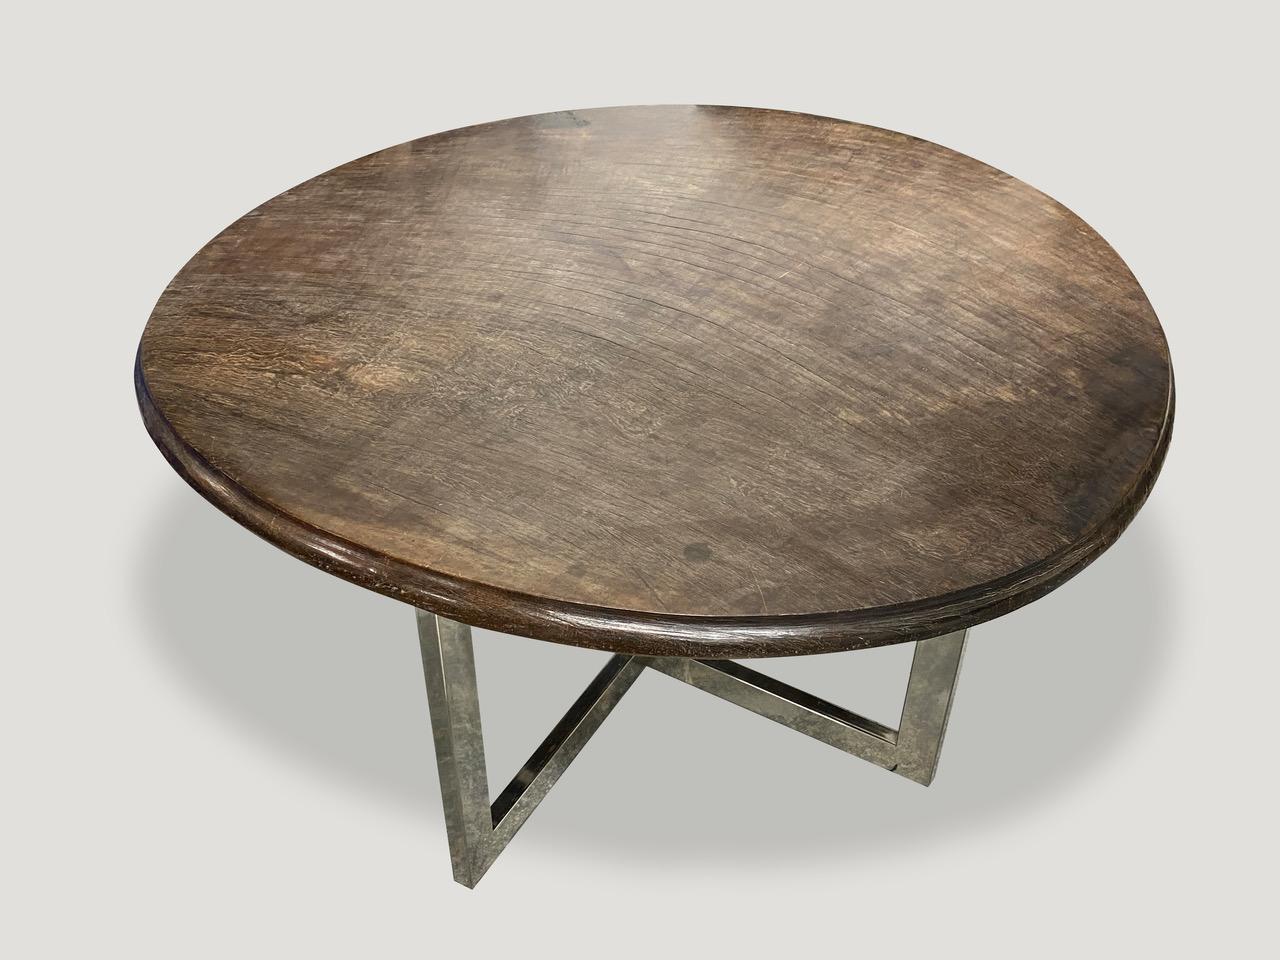 Andrianna Shamaris Ulin Wood Cocktail Table In Excellent Condition For Sale In New York, NY